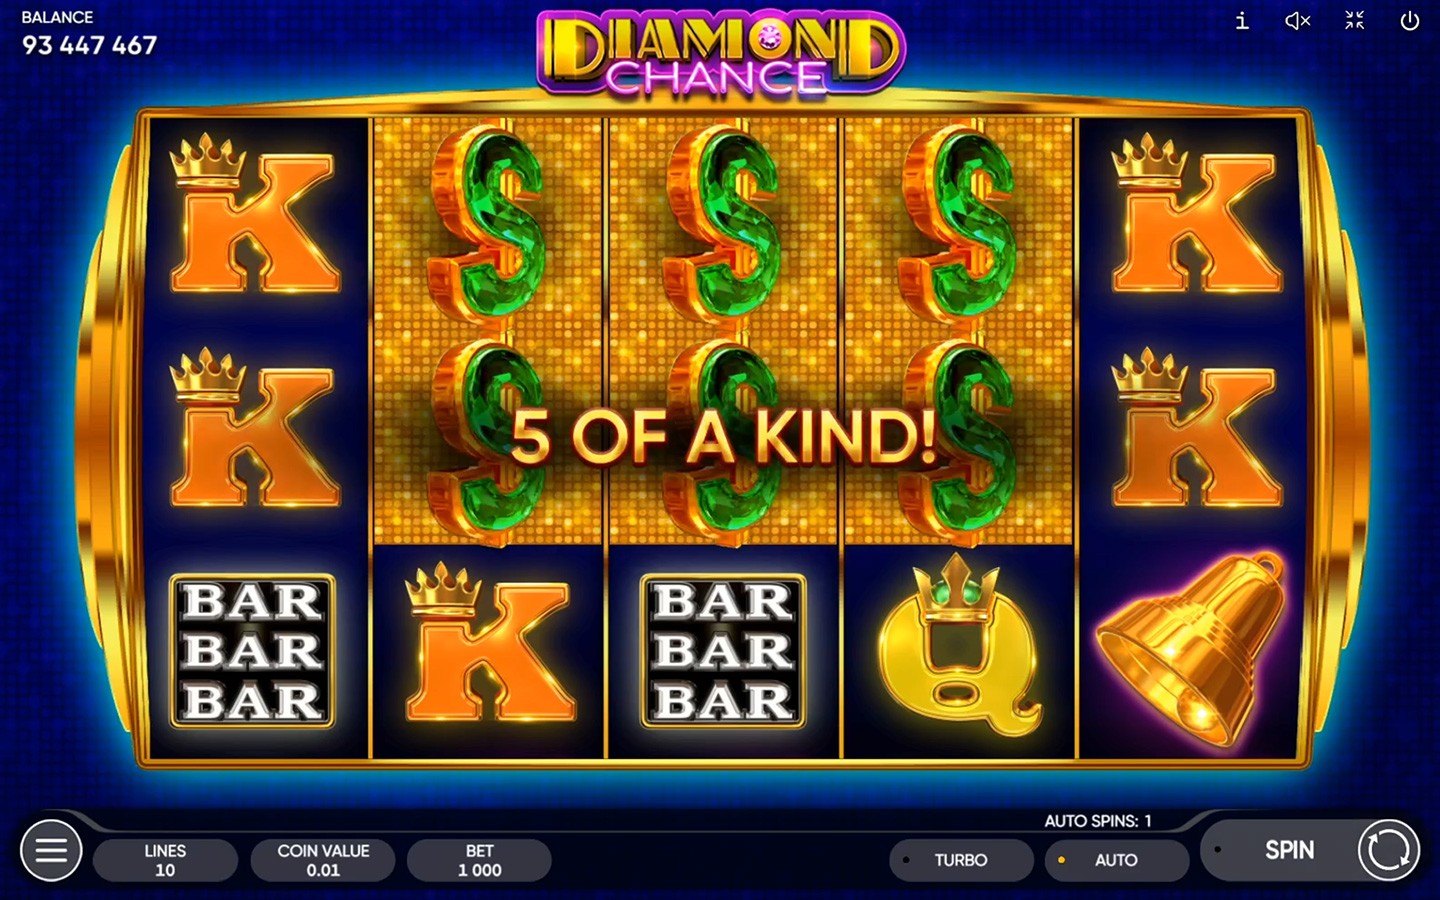 SLOT GAME SOFTWARE | Play Diamond Chance game now